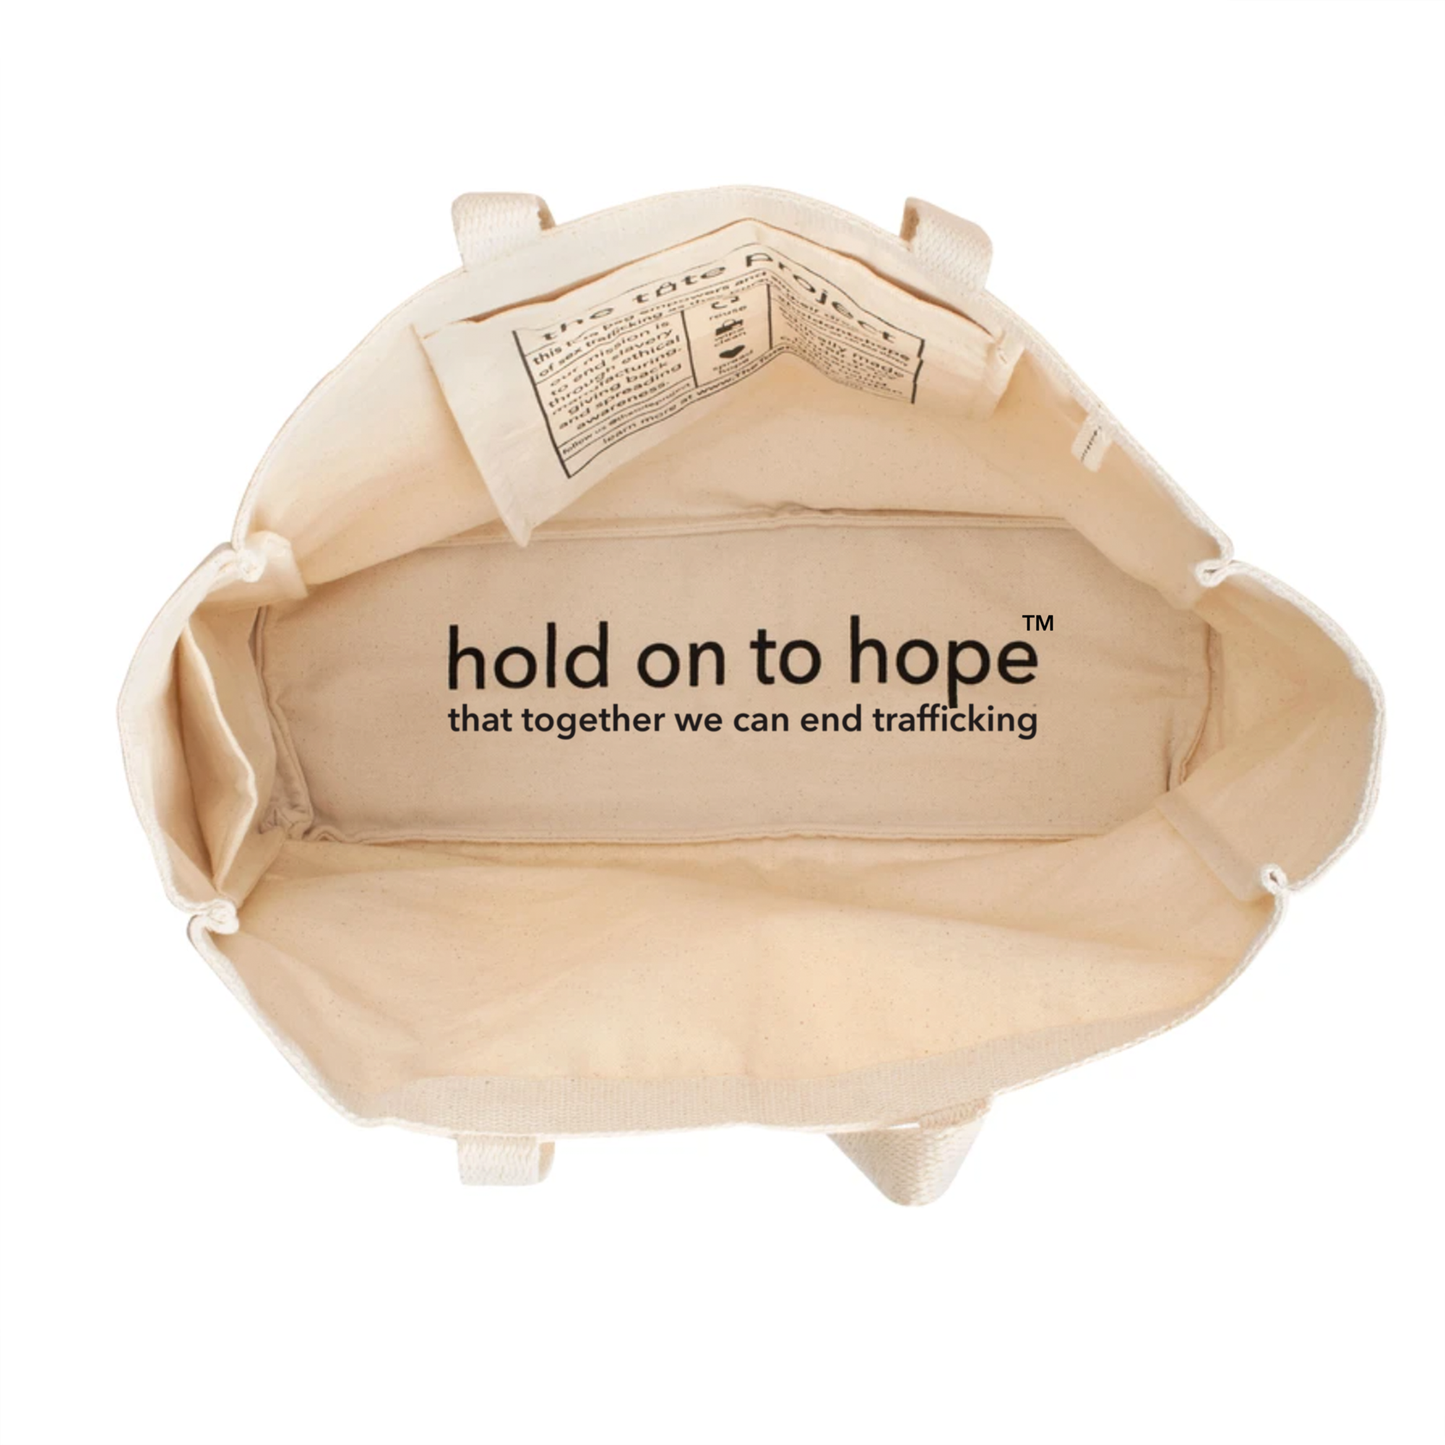 HOPE: Salvation Army x The Tote Project | Tote